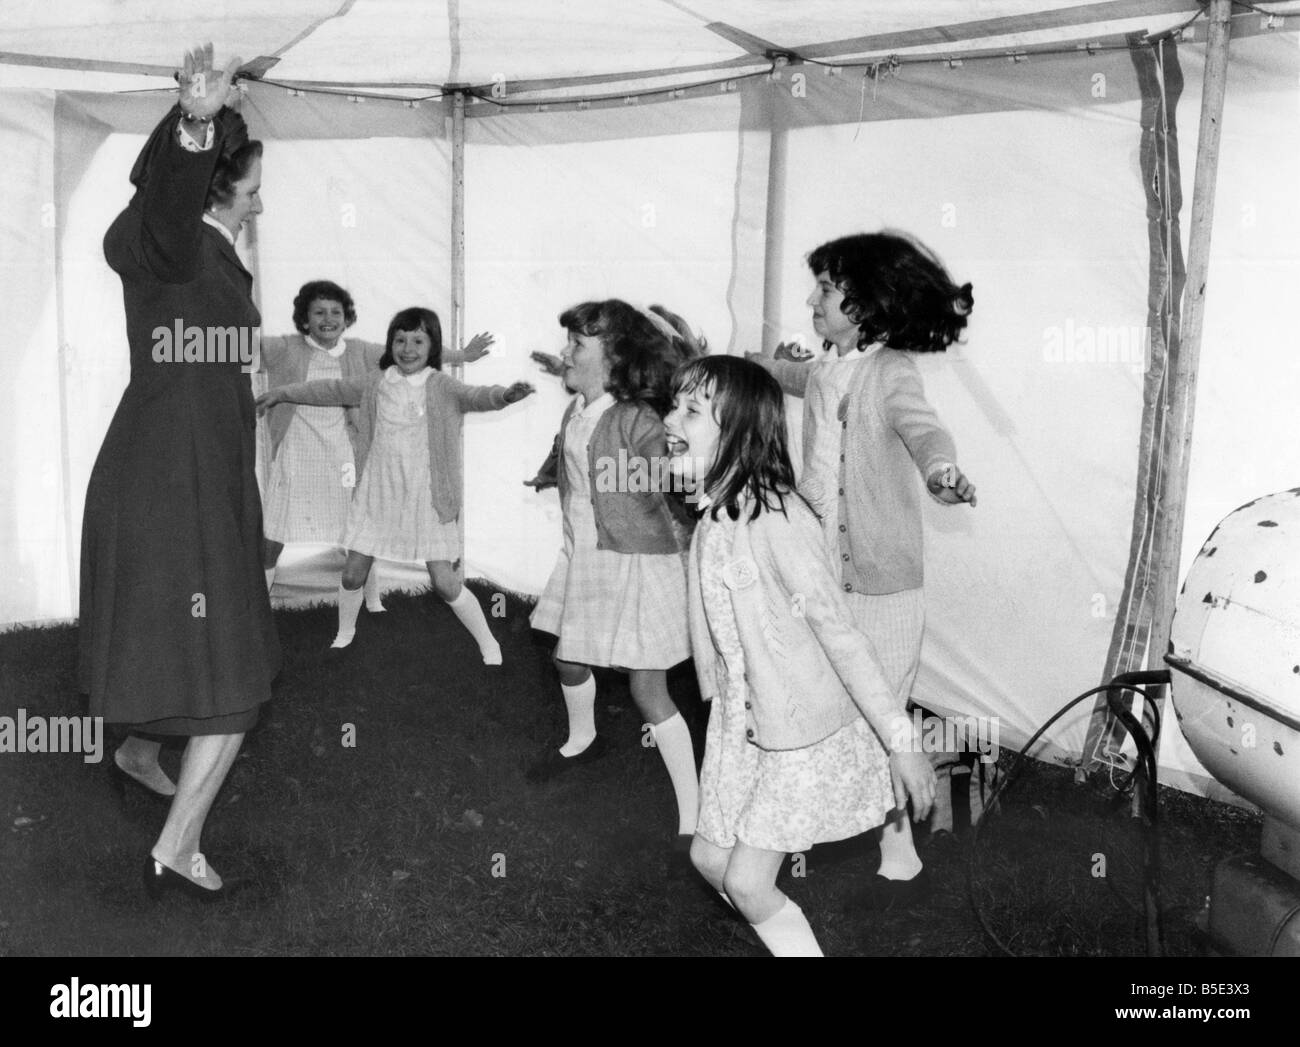 Prime Minister Margaret Thatcher seen here leading a group of children in a session of physical exercise designed to beat the winter chill at Winifred School, Stockport. December 1981 P003361 Stock Photo